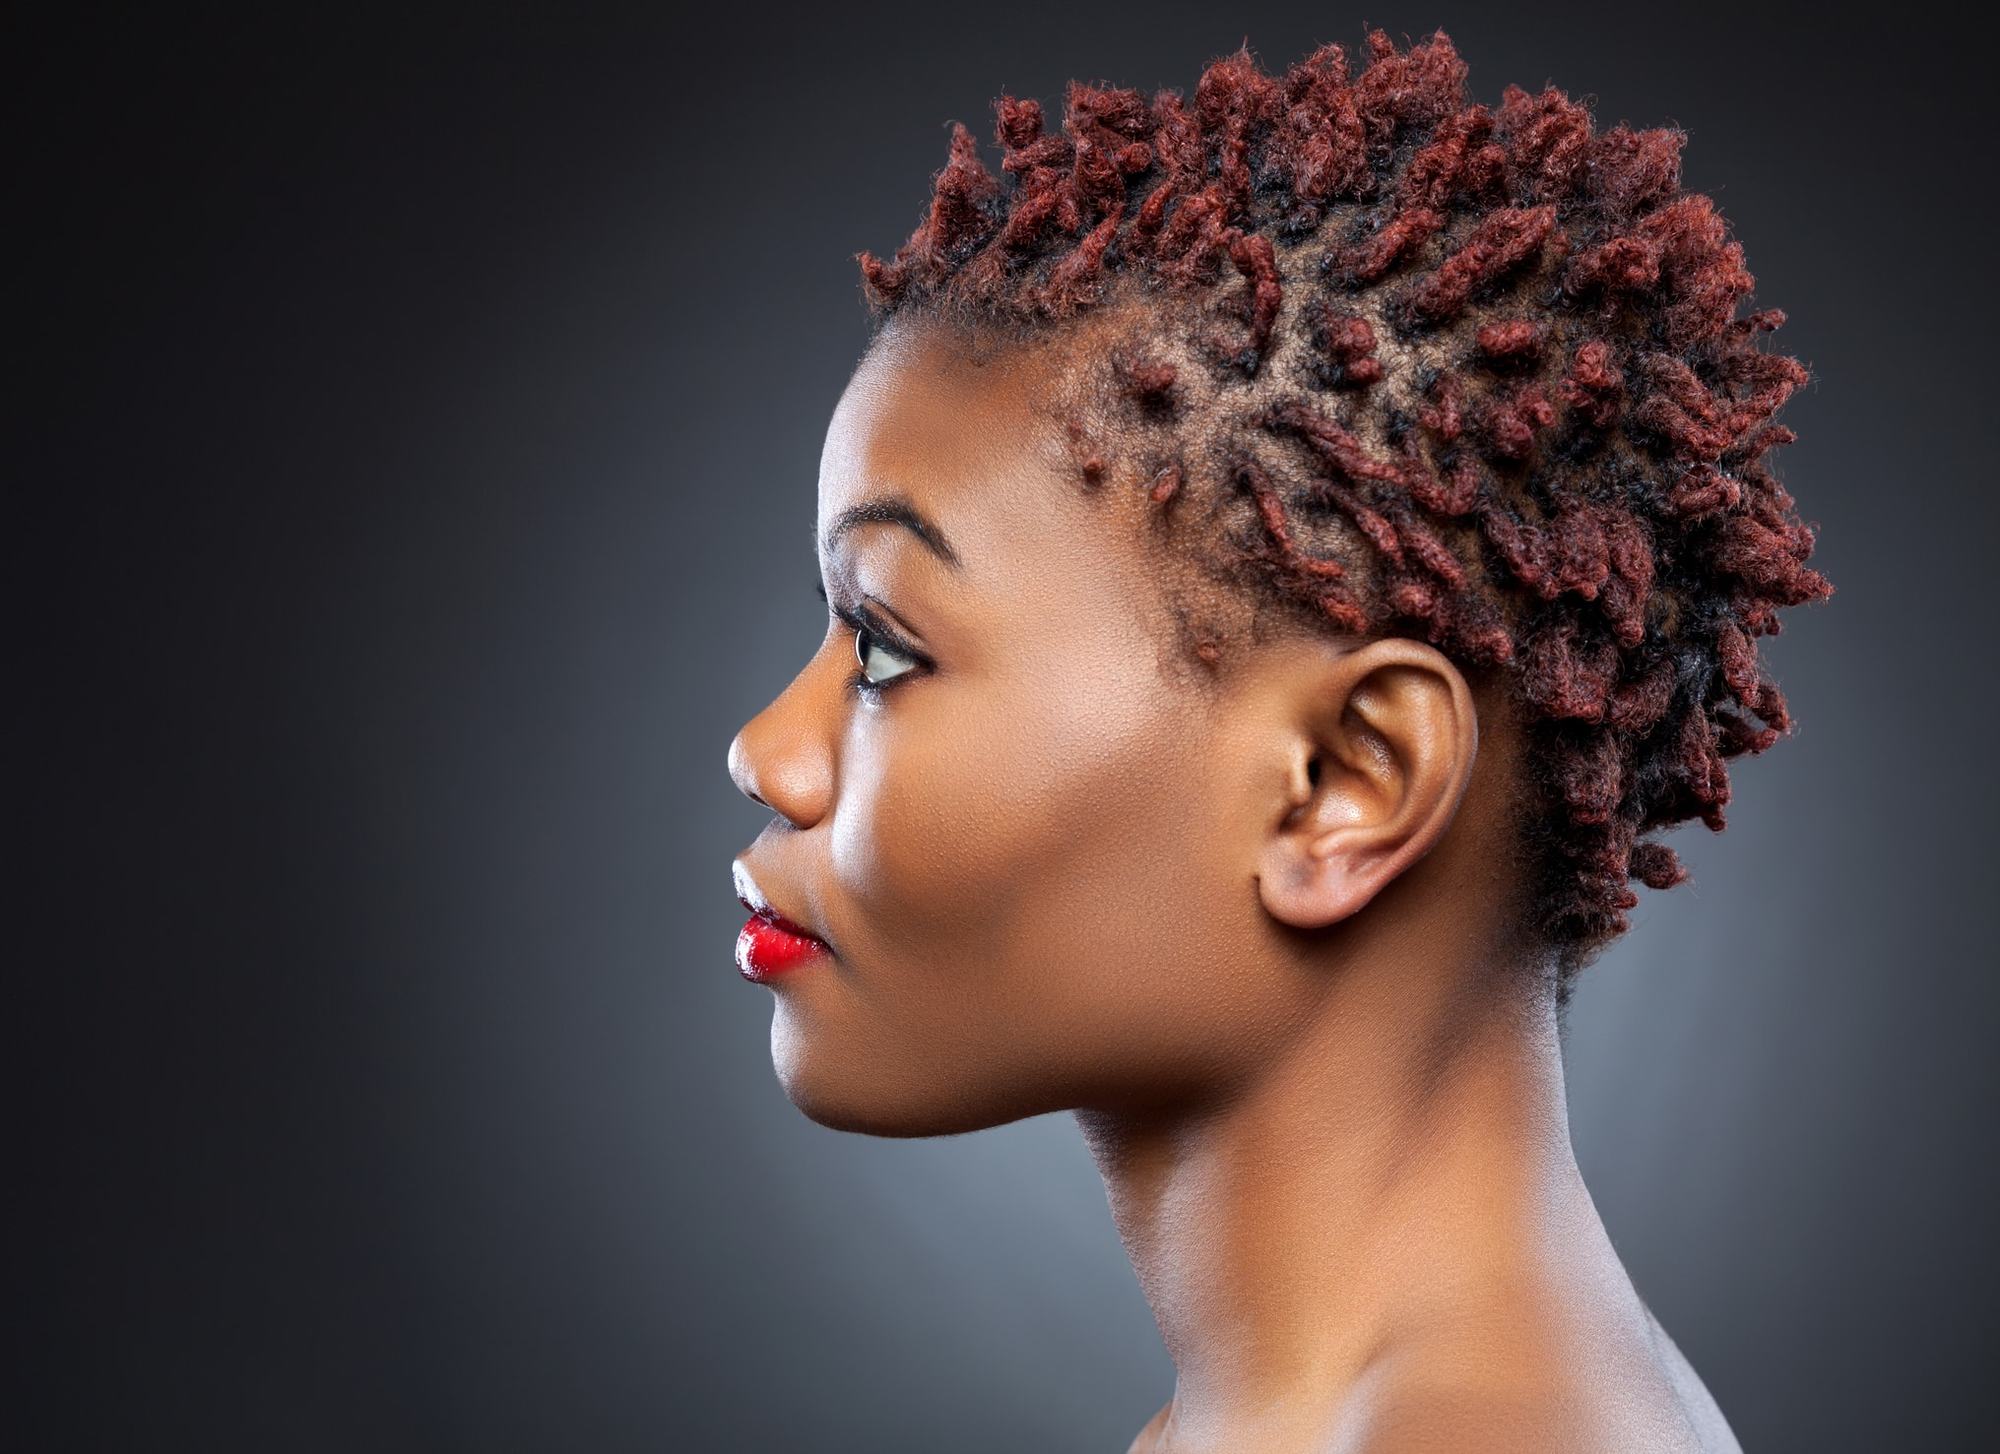 7 short natural hairstyles to try out this winter | Drum